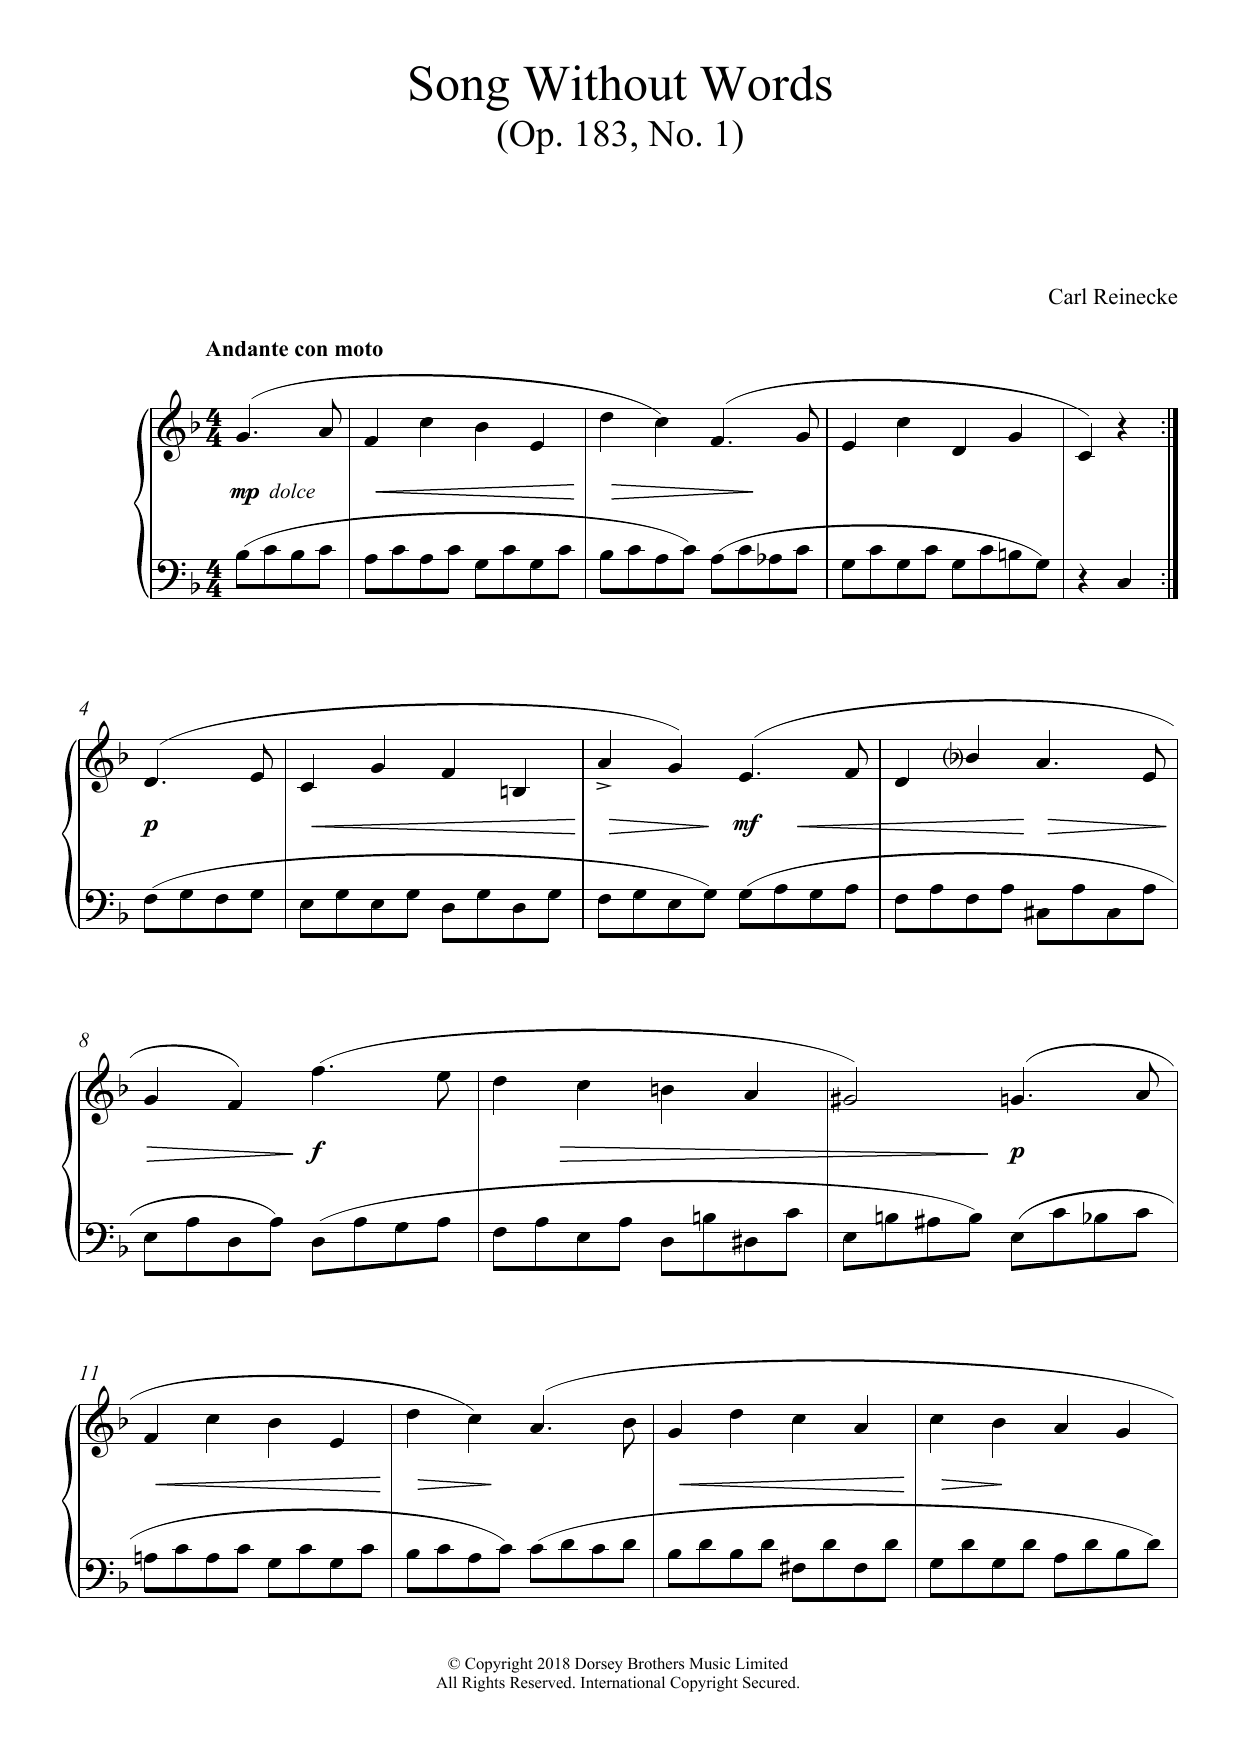 Song Without Words, Op. 183, No. 1 sheet music